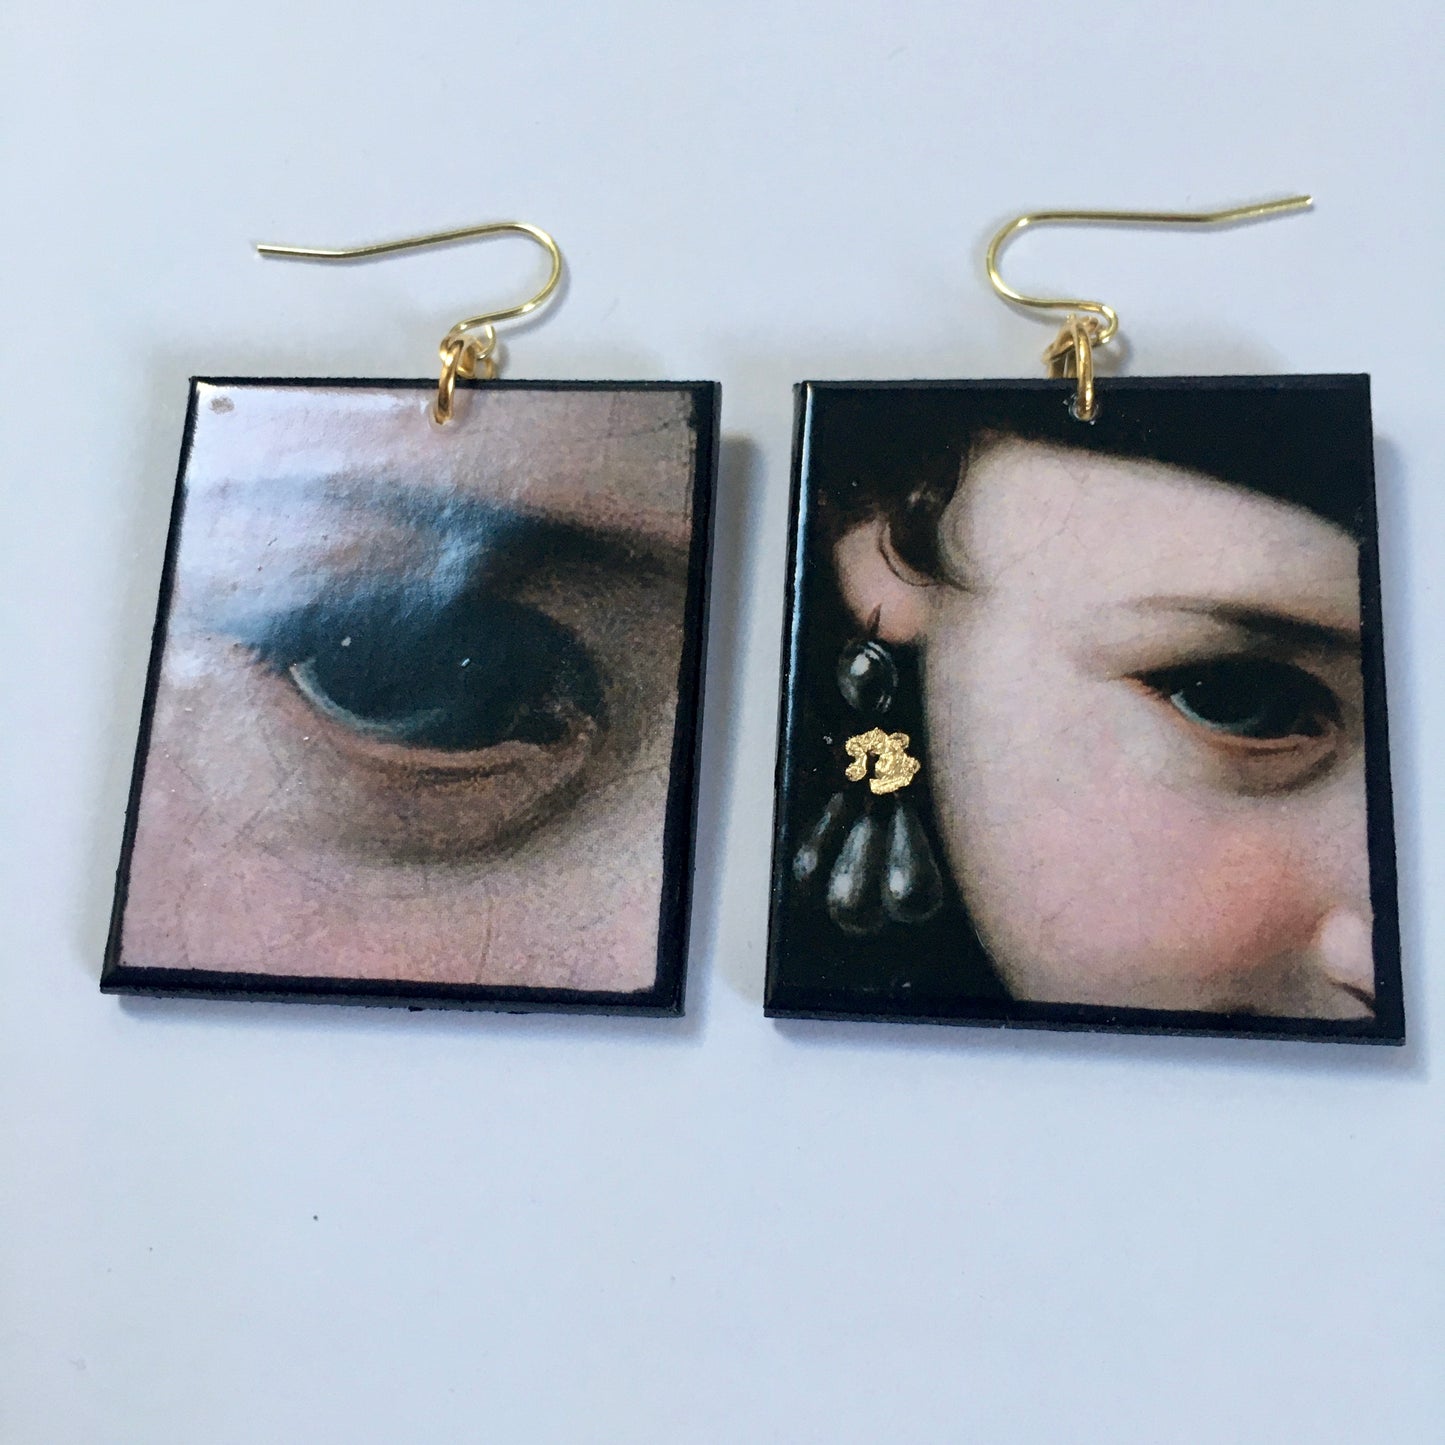 Sustainable wood earrings with  eyes details inspired by the Italian Baroque artist Pietro Antonio Rotari and his painting‘Girl with a Book’ 